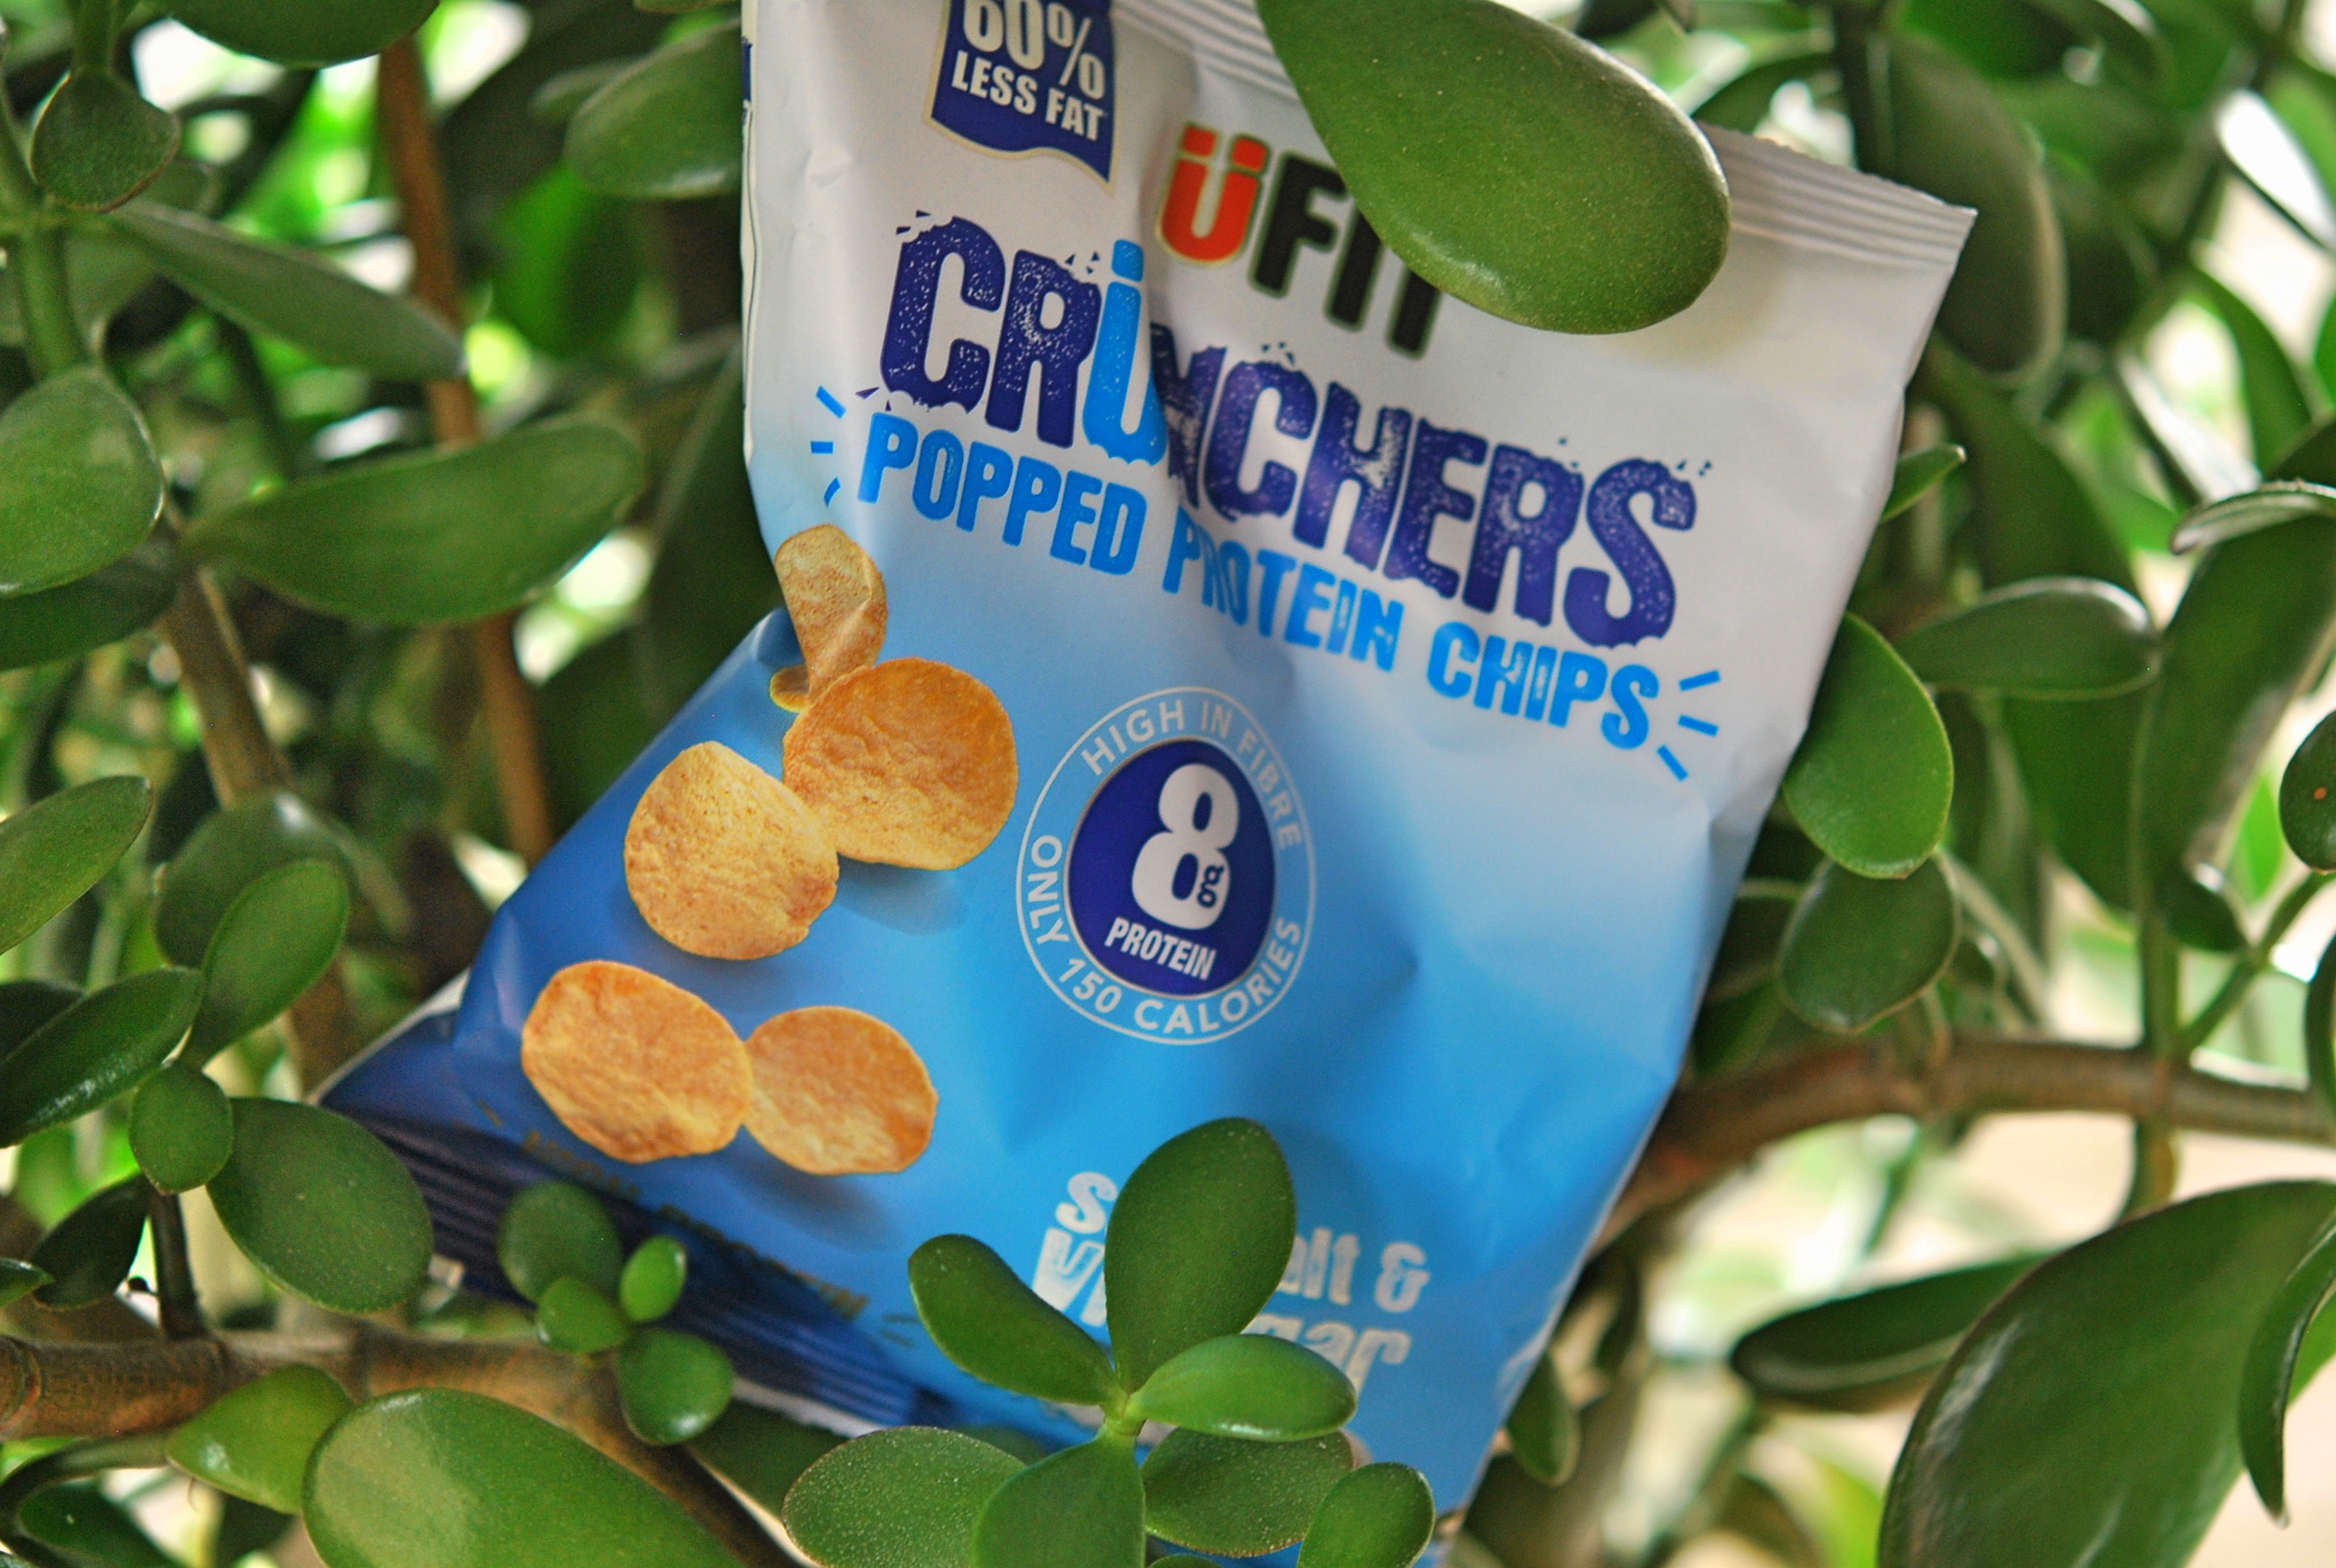 UFit Crunchers Review | YourFoodFantasy.com